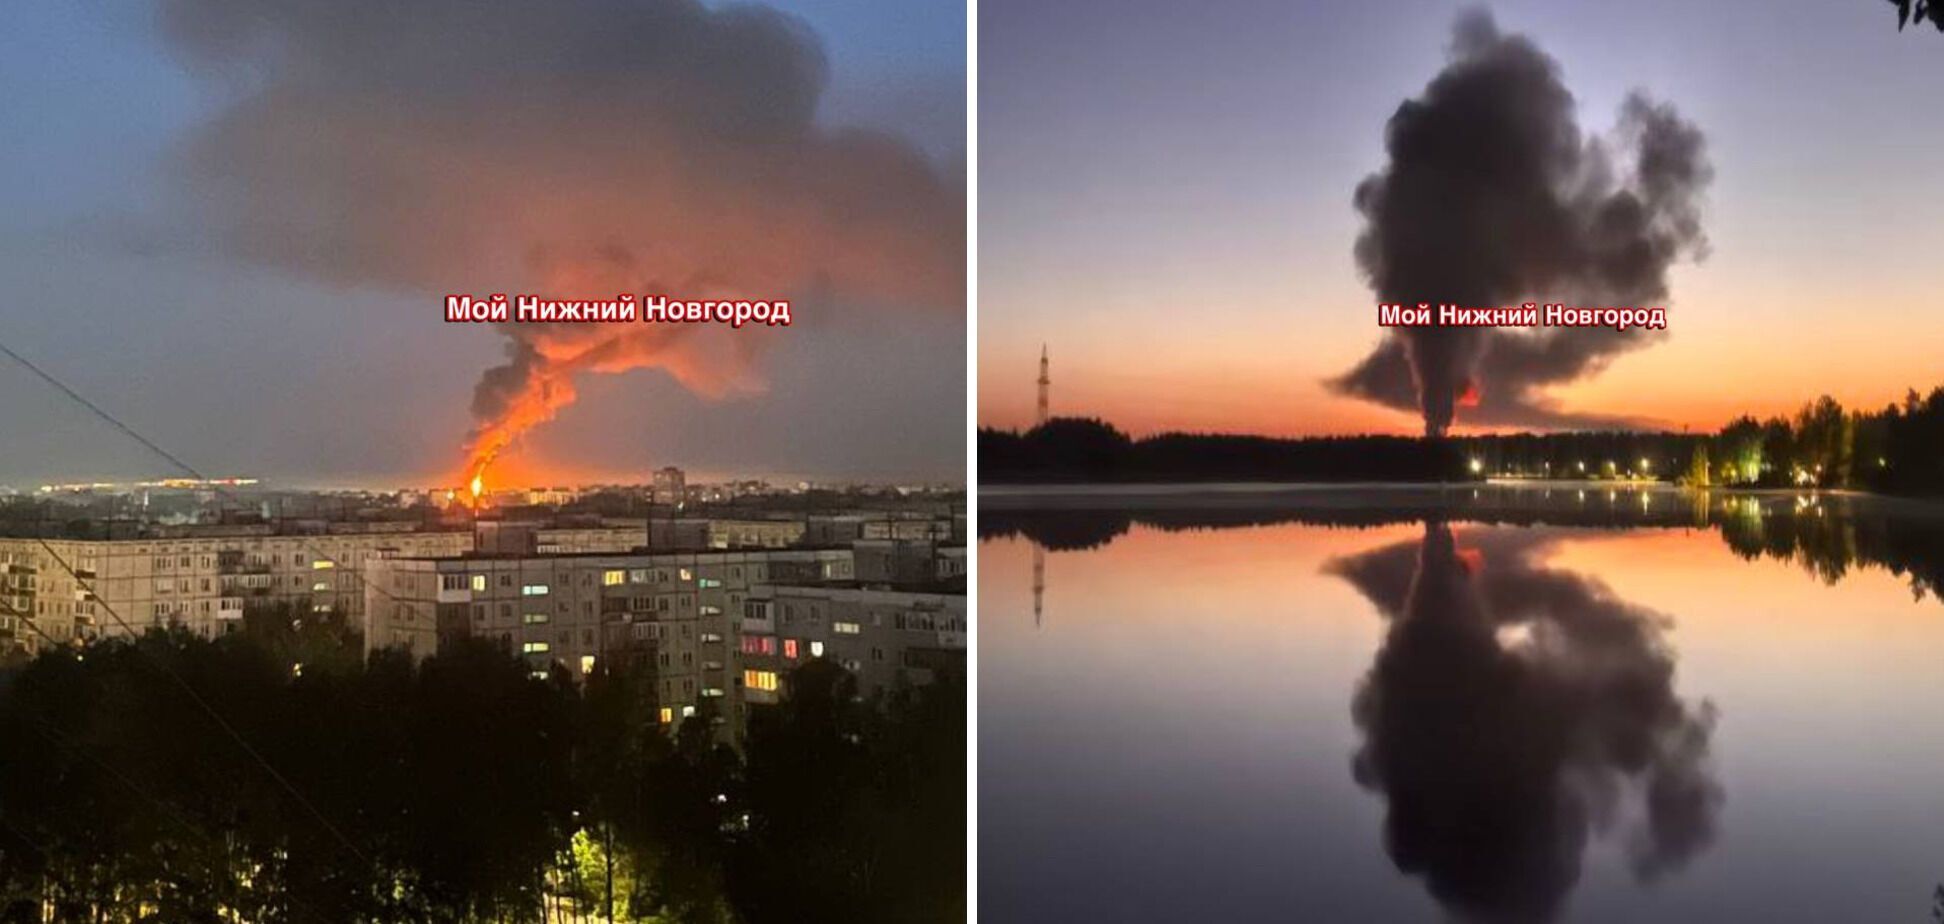 Russia complains of massive drone attack: explosions heard in many regions, a large-scale fire reported in Nizhny Novgorod. Photo and video